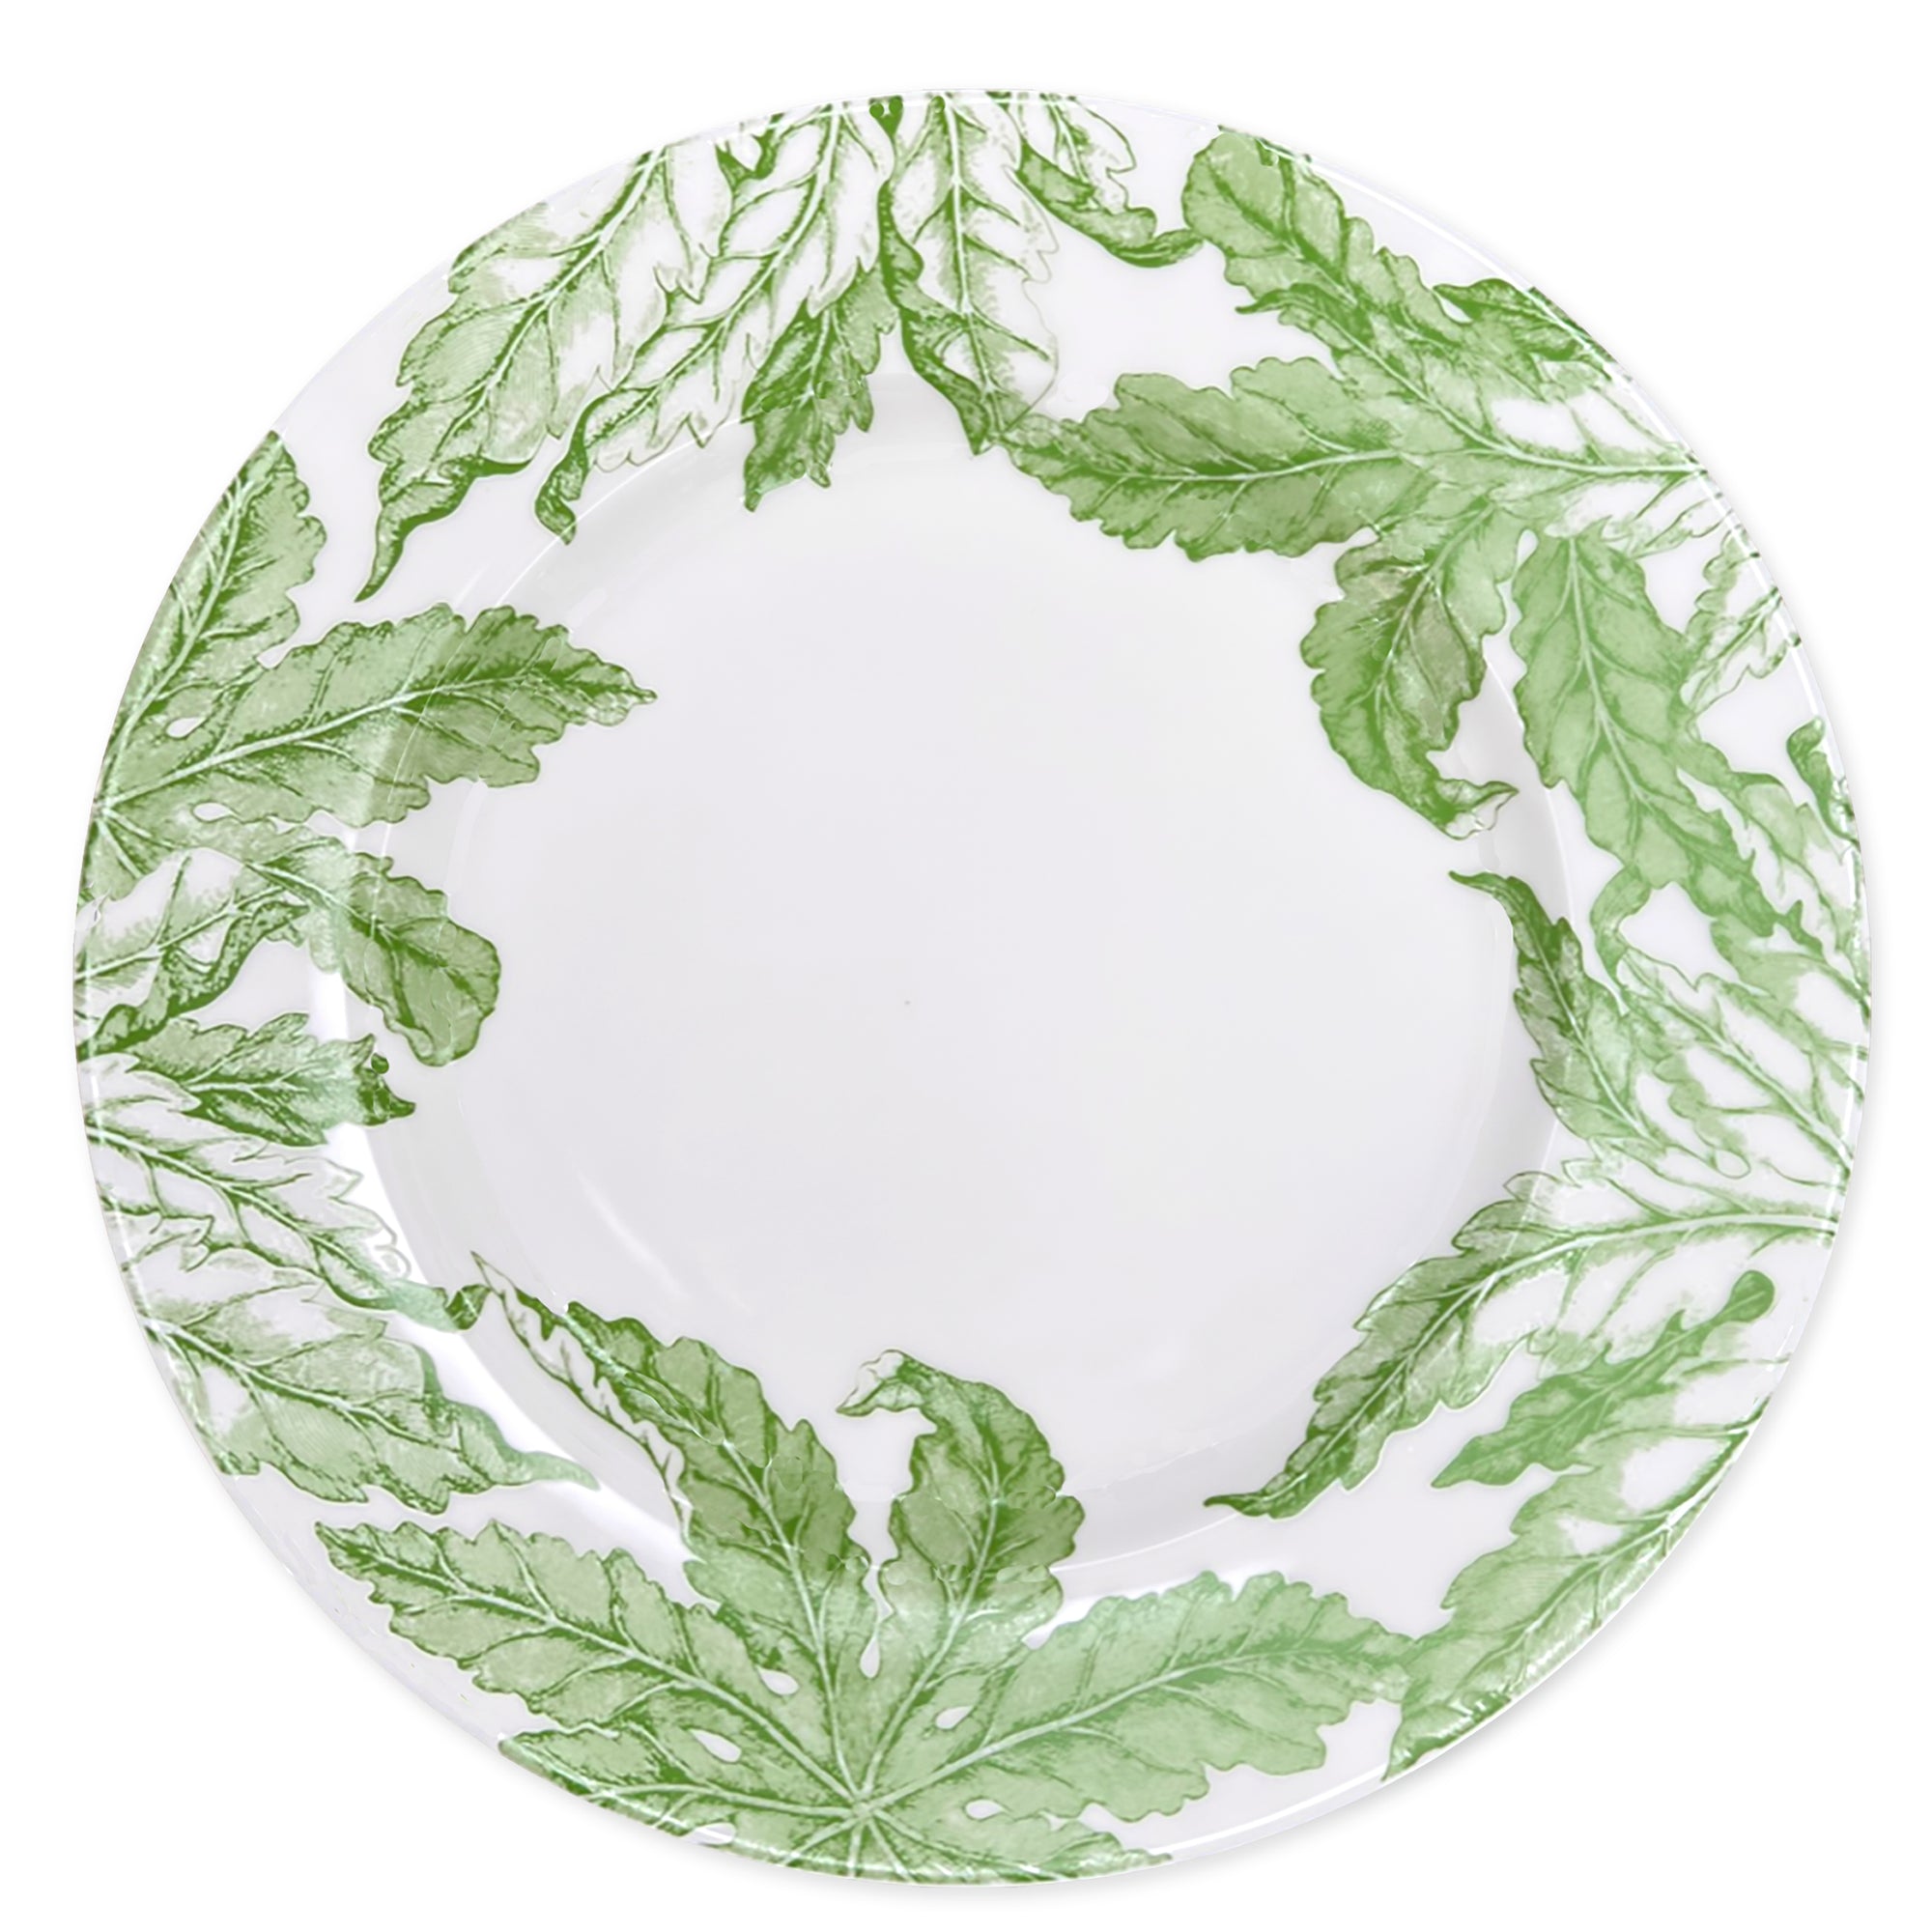 A white ceramic plate featuring green leafy designs around the rim brings to mind a Freya Rimmed Charger Plate by Caskata Artisanal Home worthy of the goddess of love.